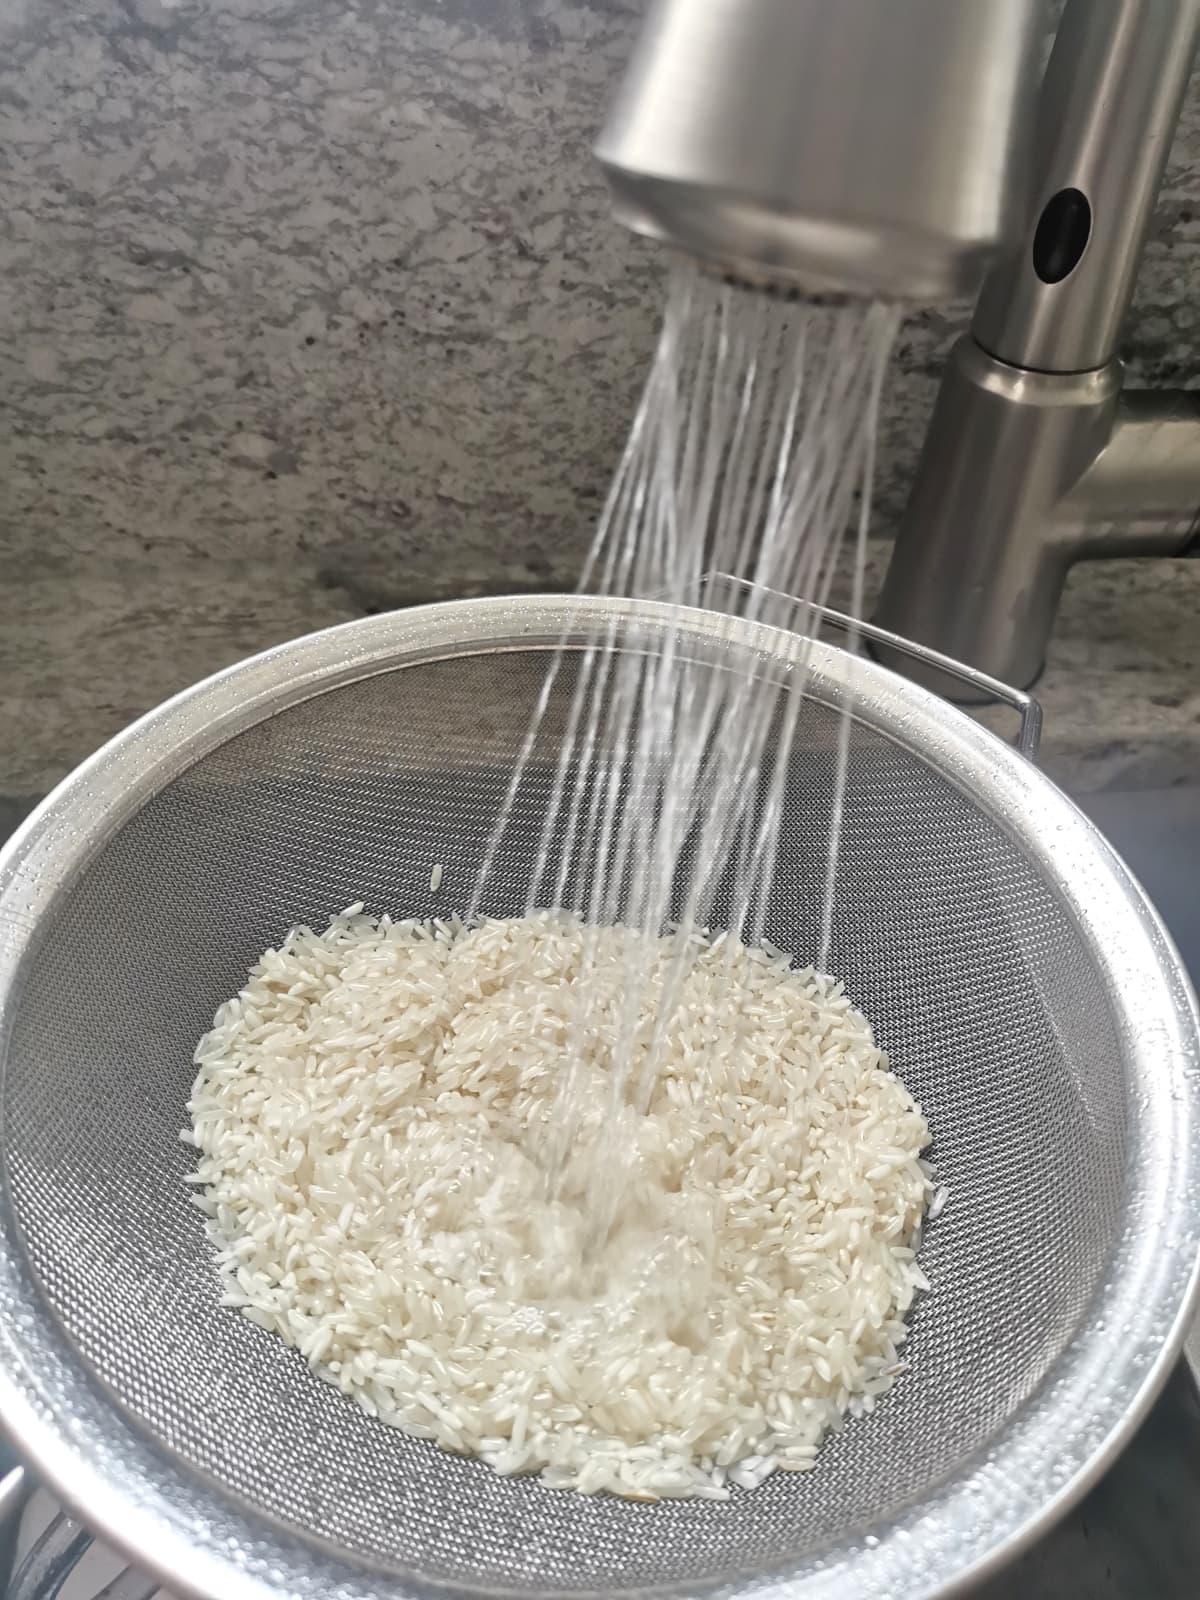 white rice in a mesh strainer rinsing under running water in the sink.